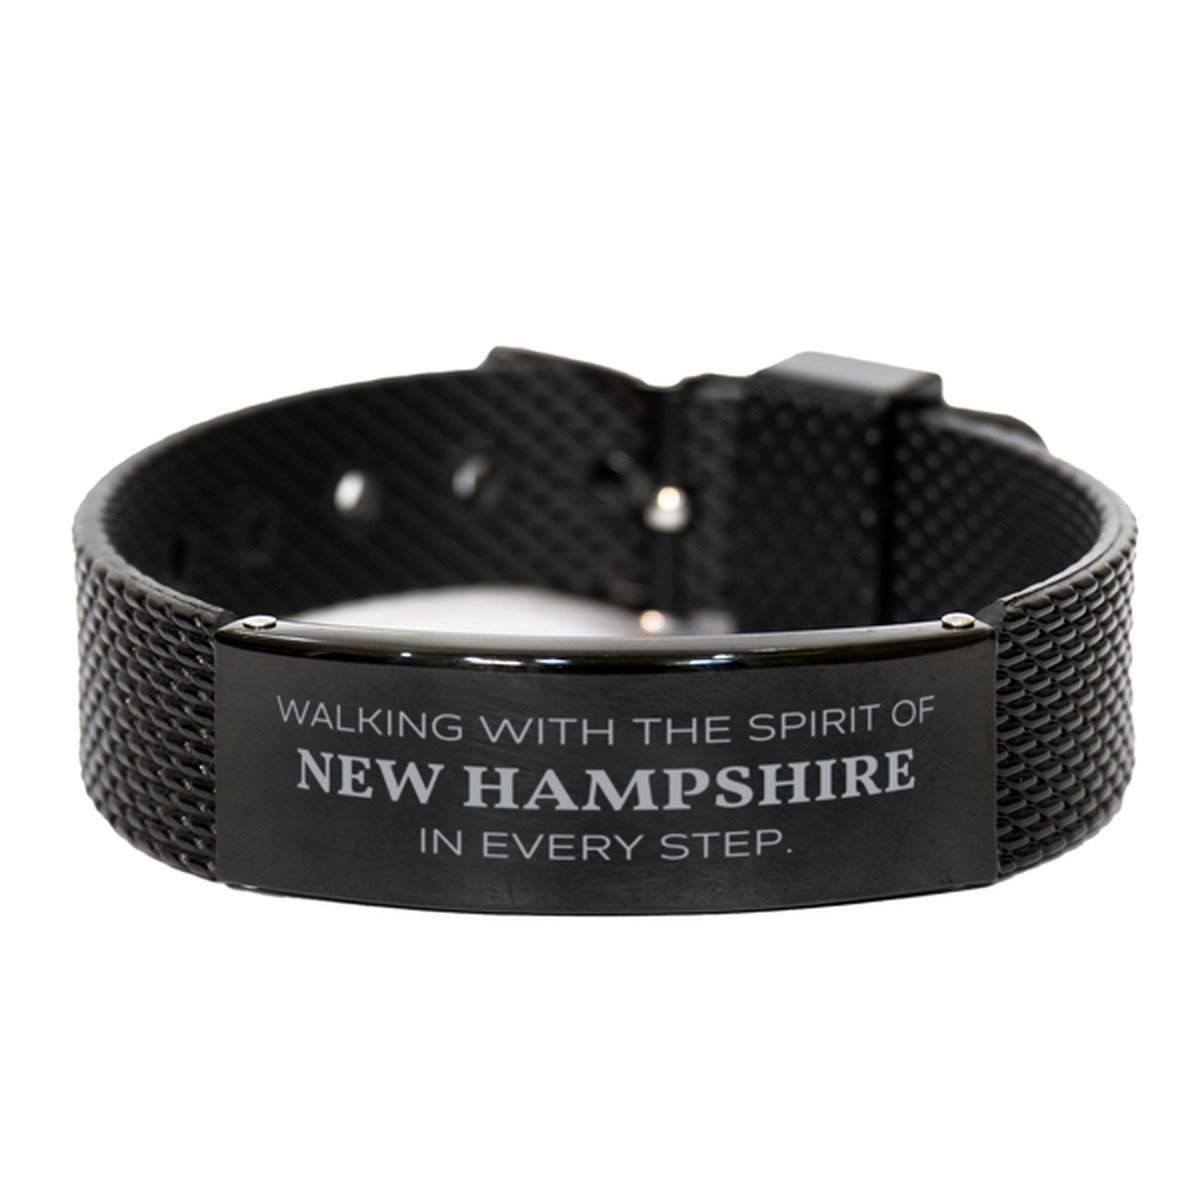 New Hampshire Gifts, Walking with the spirit, Love New Hampshire Birthday Christmas Black Shark Mesh Bracelet For New Hampshire People, Men, Women, Friends